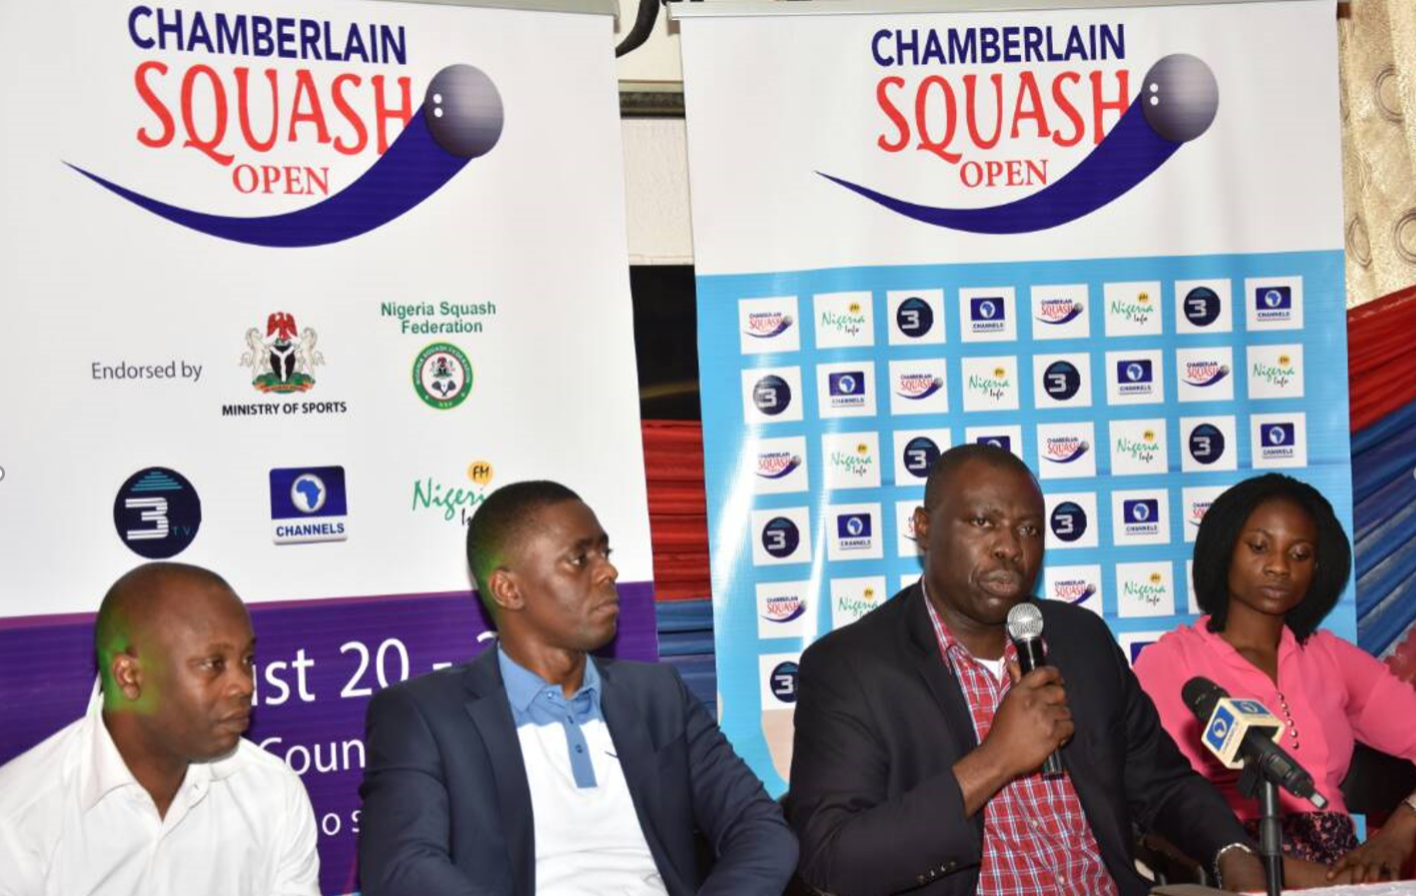 $12k Up As Prize Money At Maiden Chamberlain Squash Open